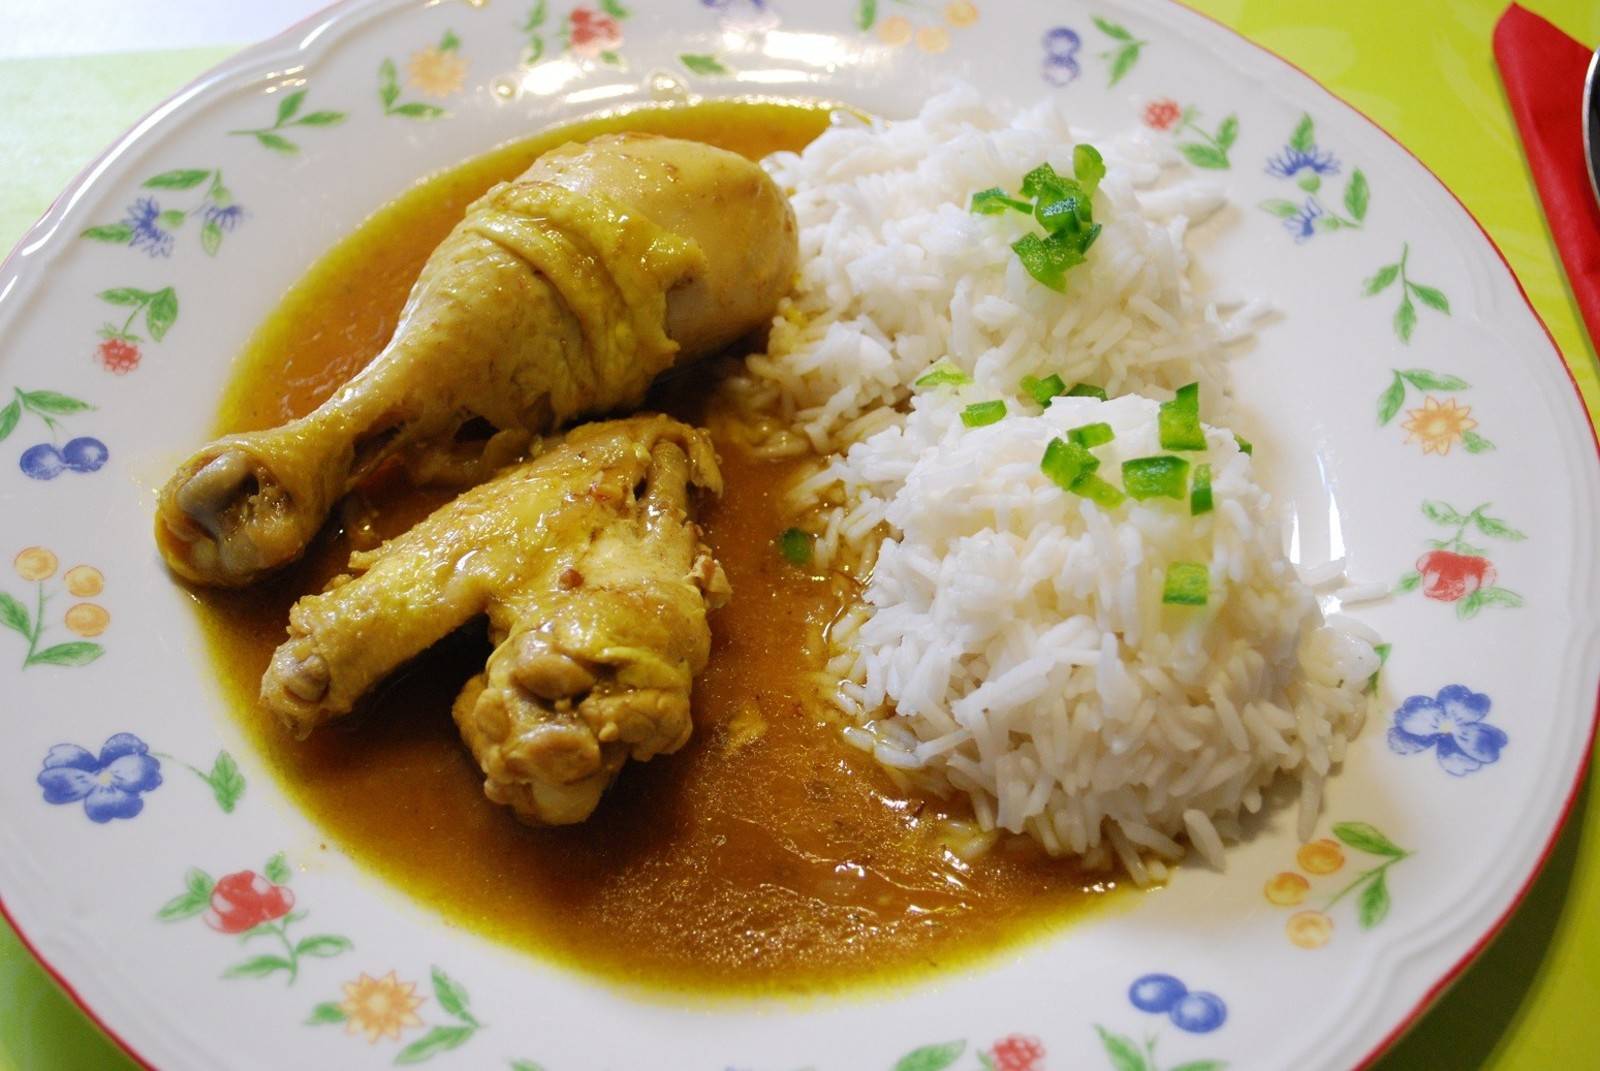 Curry-Huhn